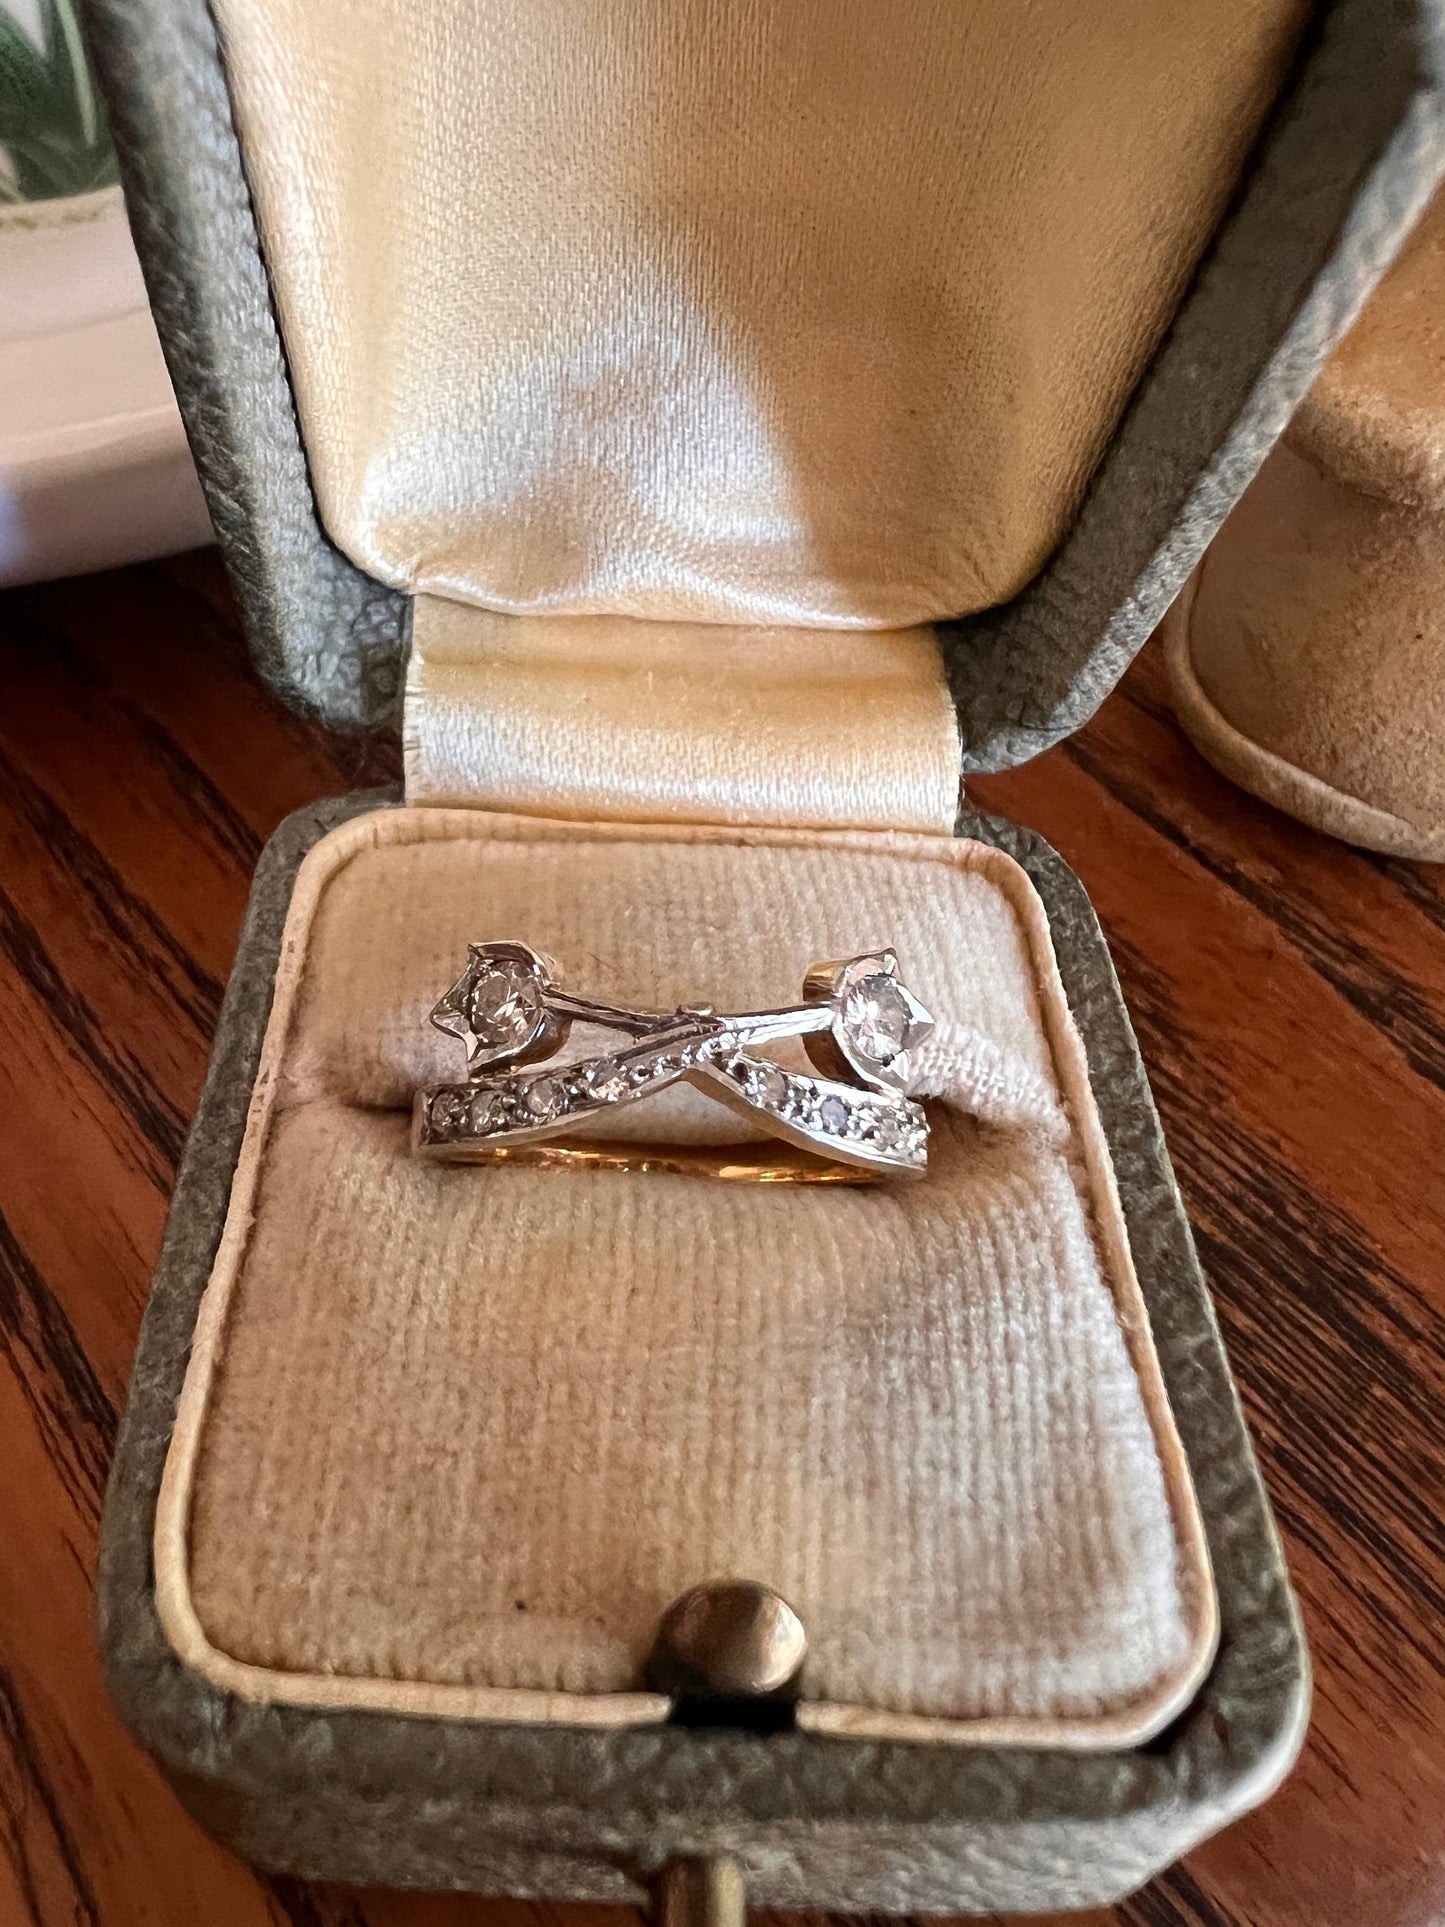 Antique TULIPS Single Cut Diamond Ring French Antique 18k Gold Bow Crossing Stacker Band Figural Floral Pinky Midi Victorian Belle Epoque